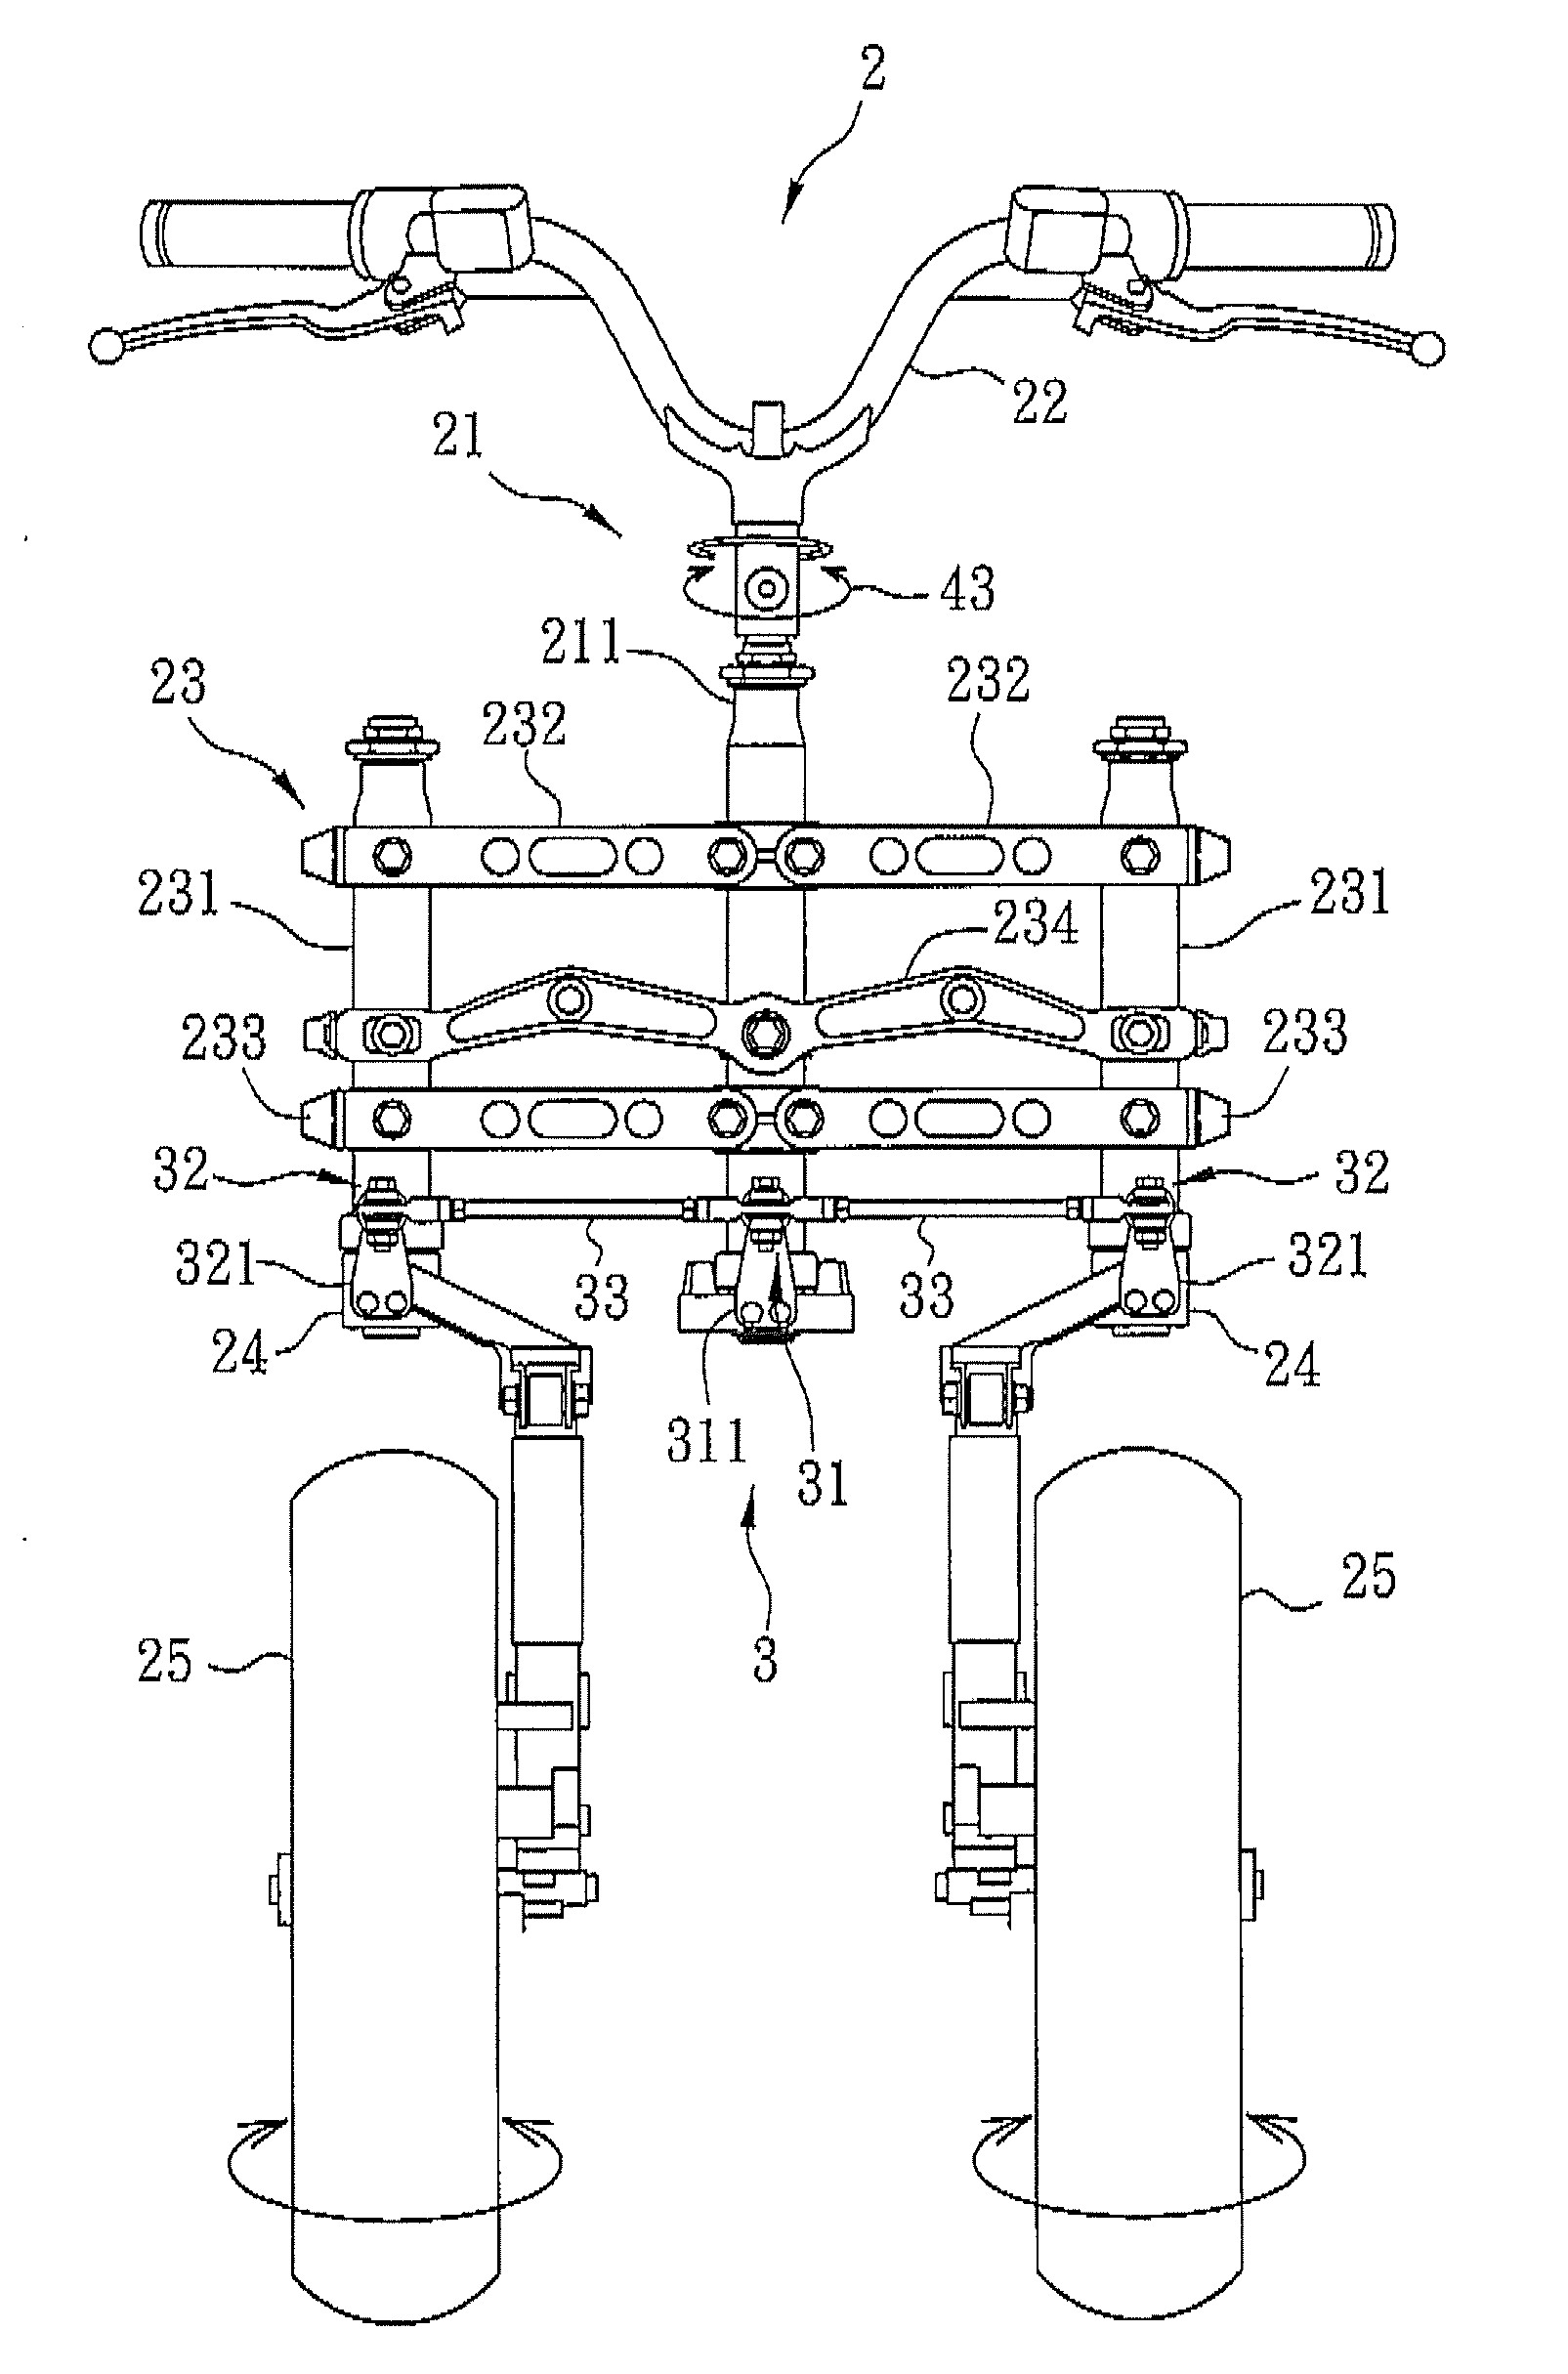 Steering apparatus for a vehicle having two front wheels